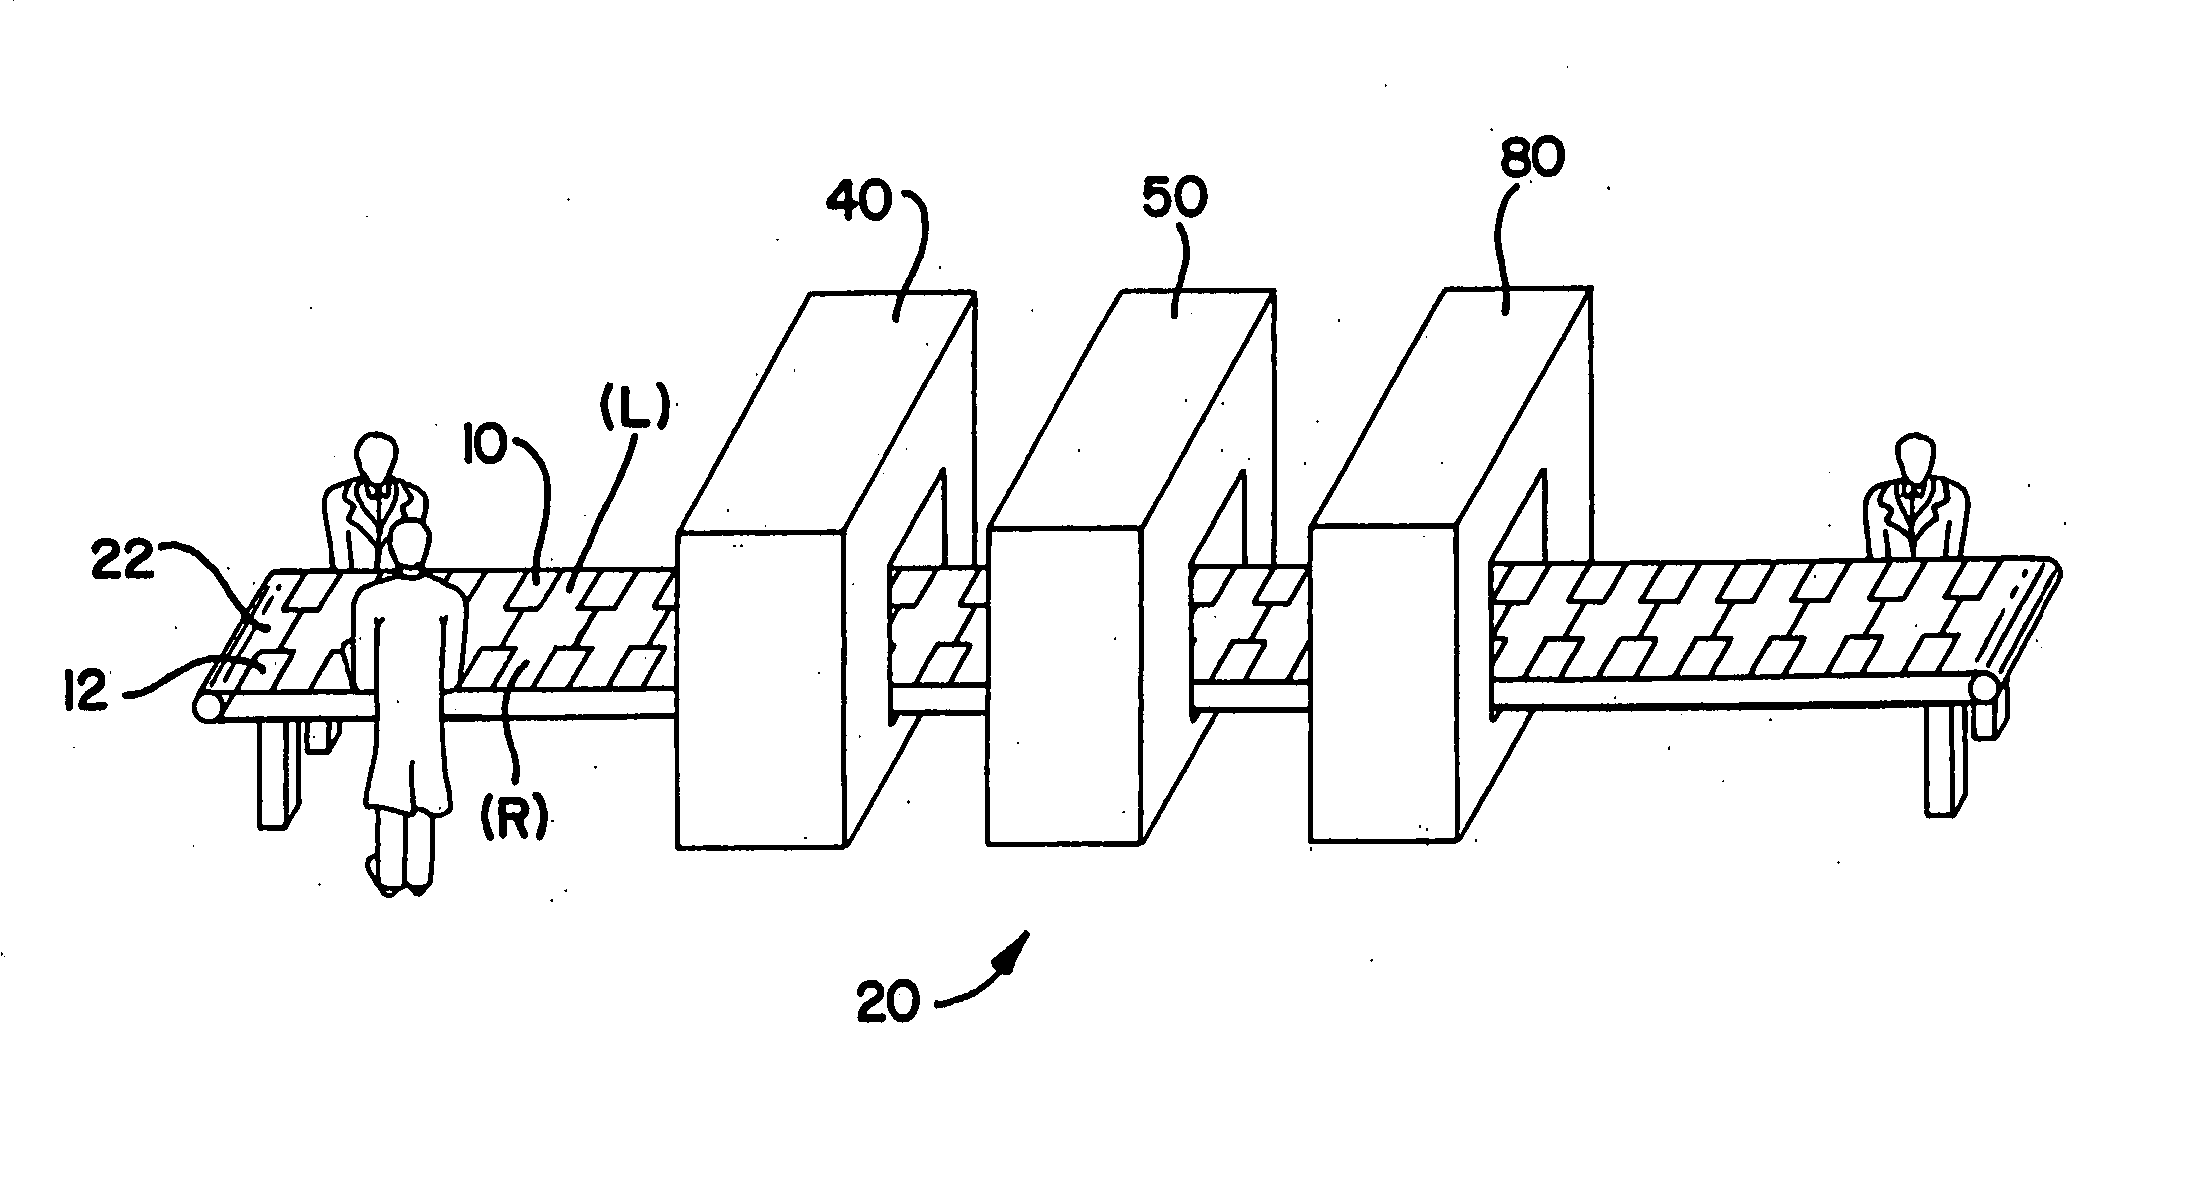 Apparatus for manipulating pre-sterilized components in an active sterile field